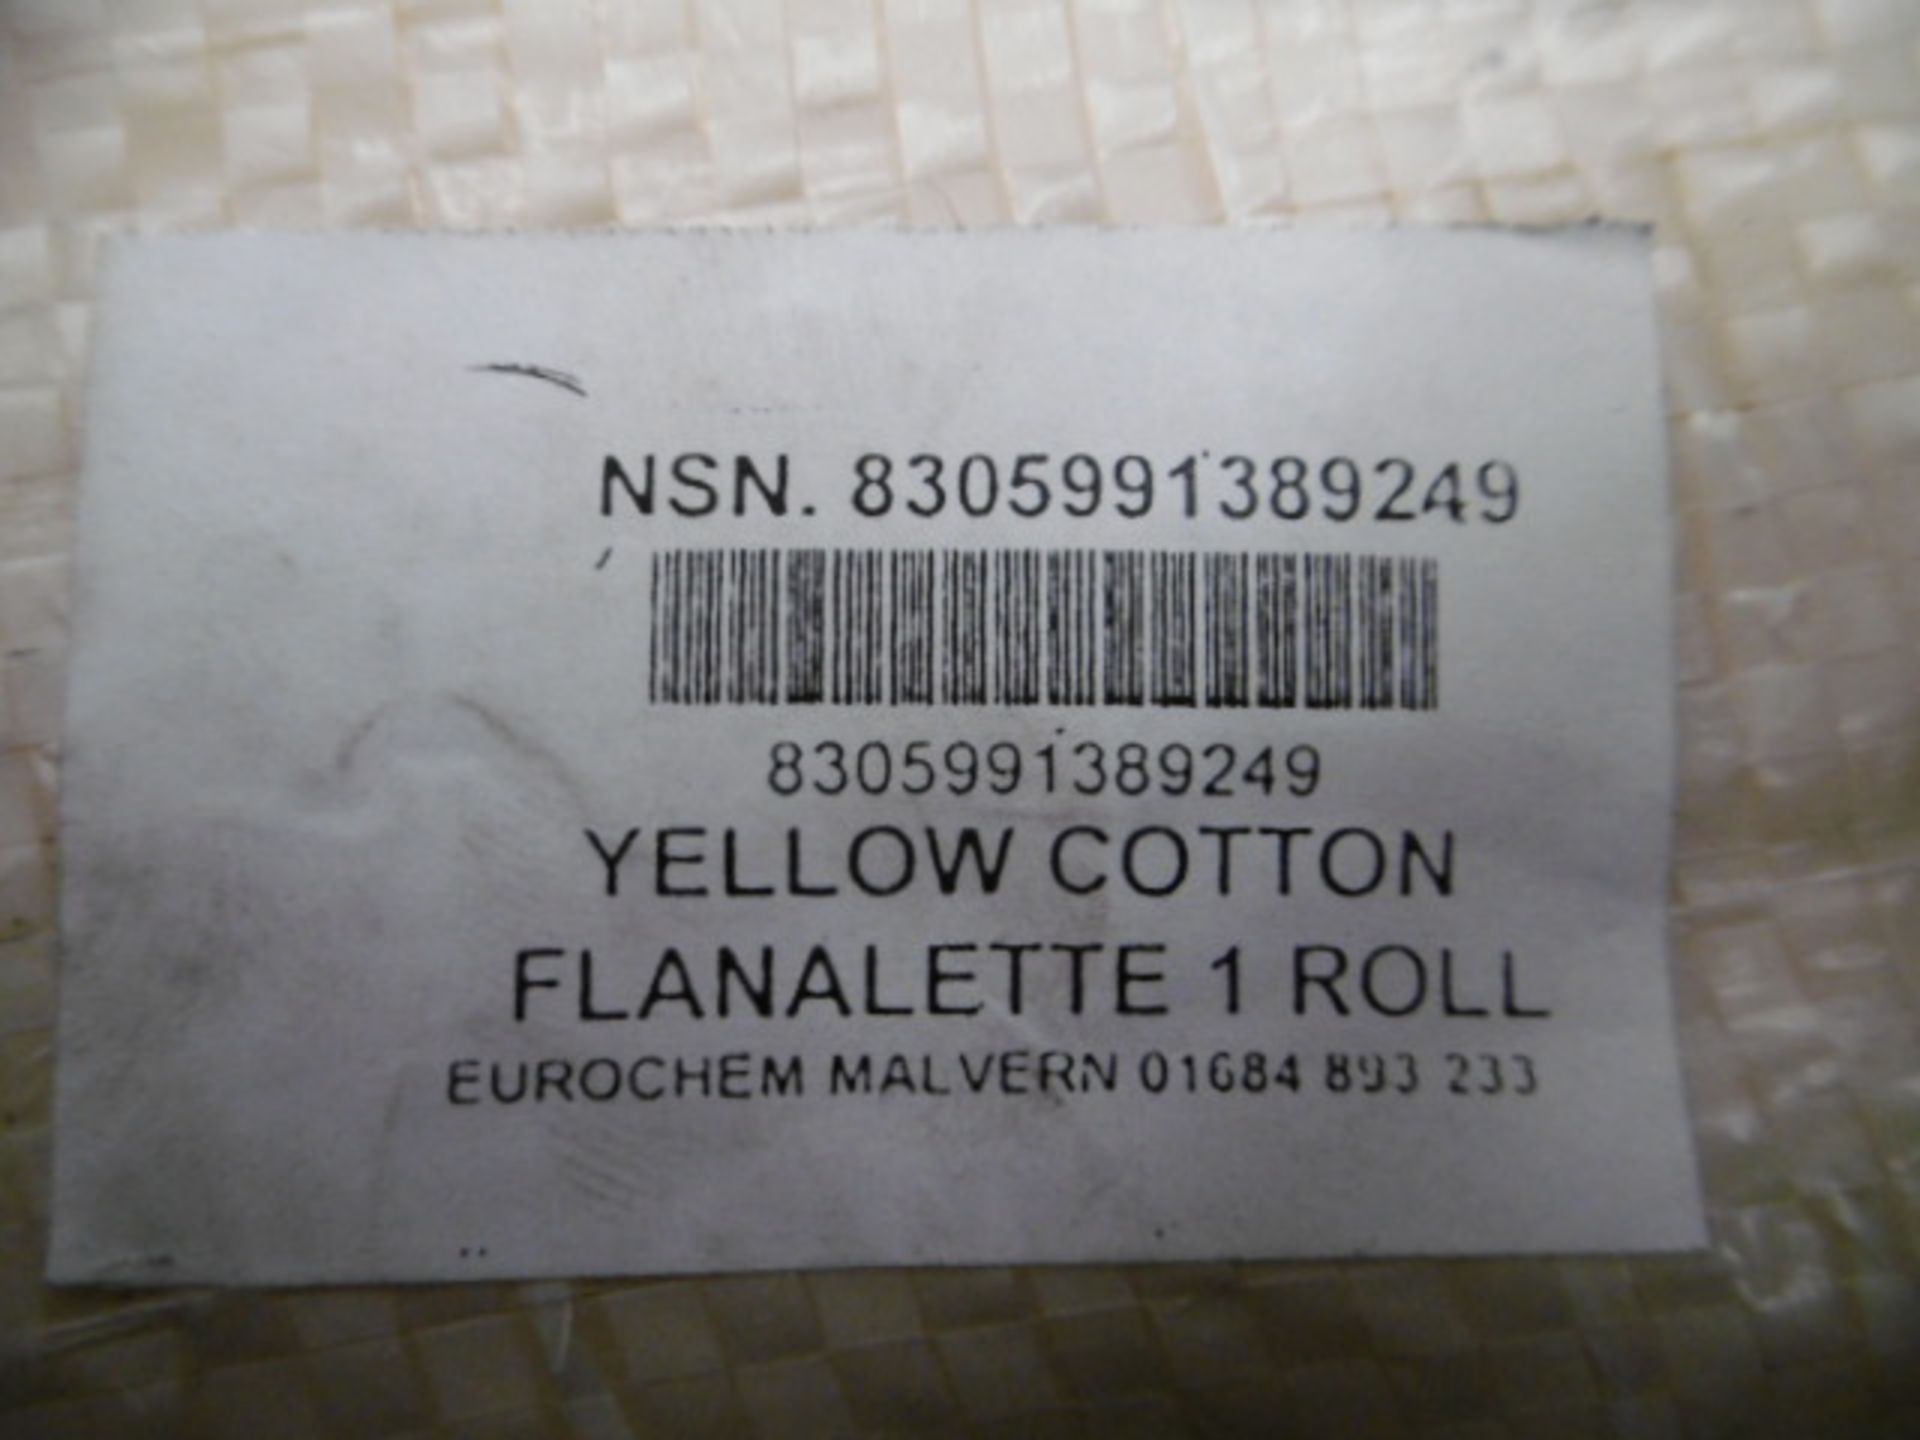 1m x 40m Roll of Cotton Polishing Flanalette - Image 4 of 6